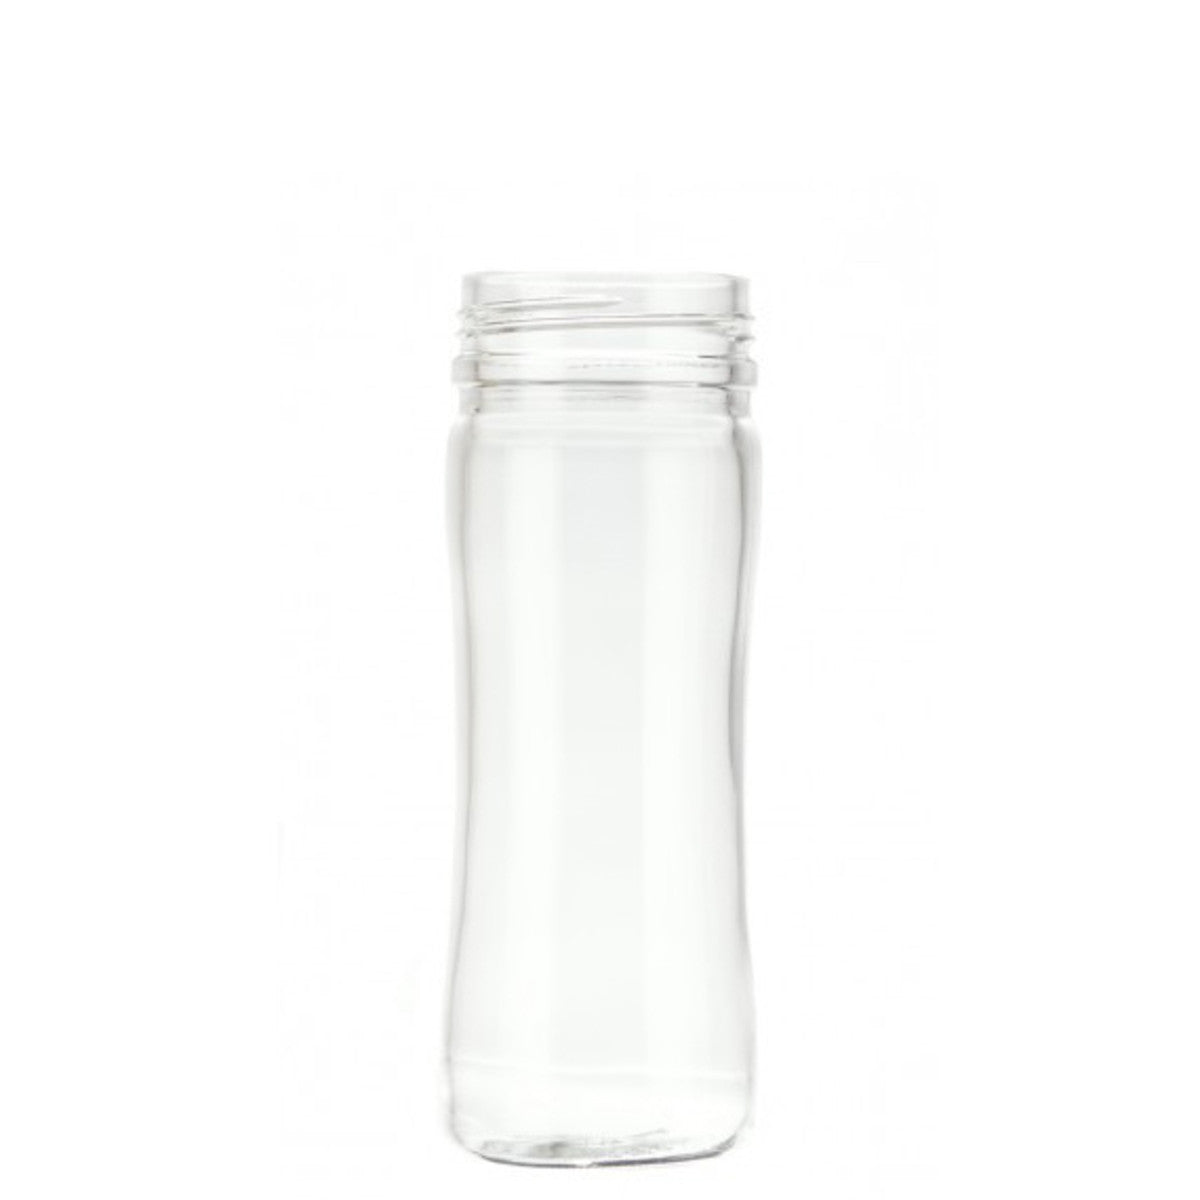 Lifefactory 12 oz Replacement Glass Bottles